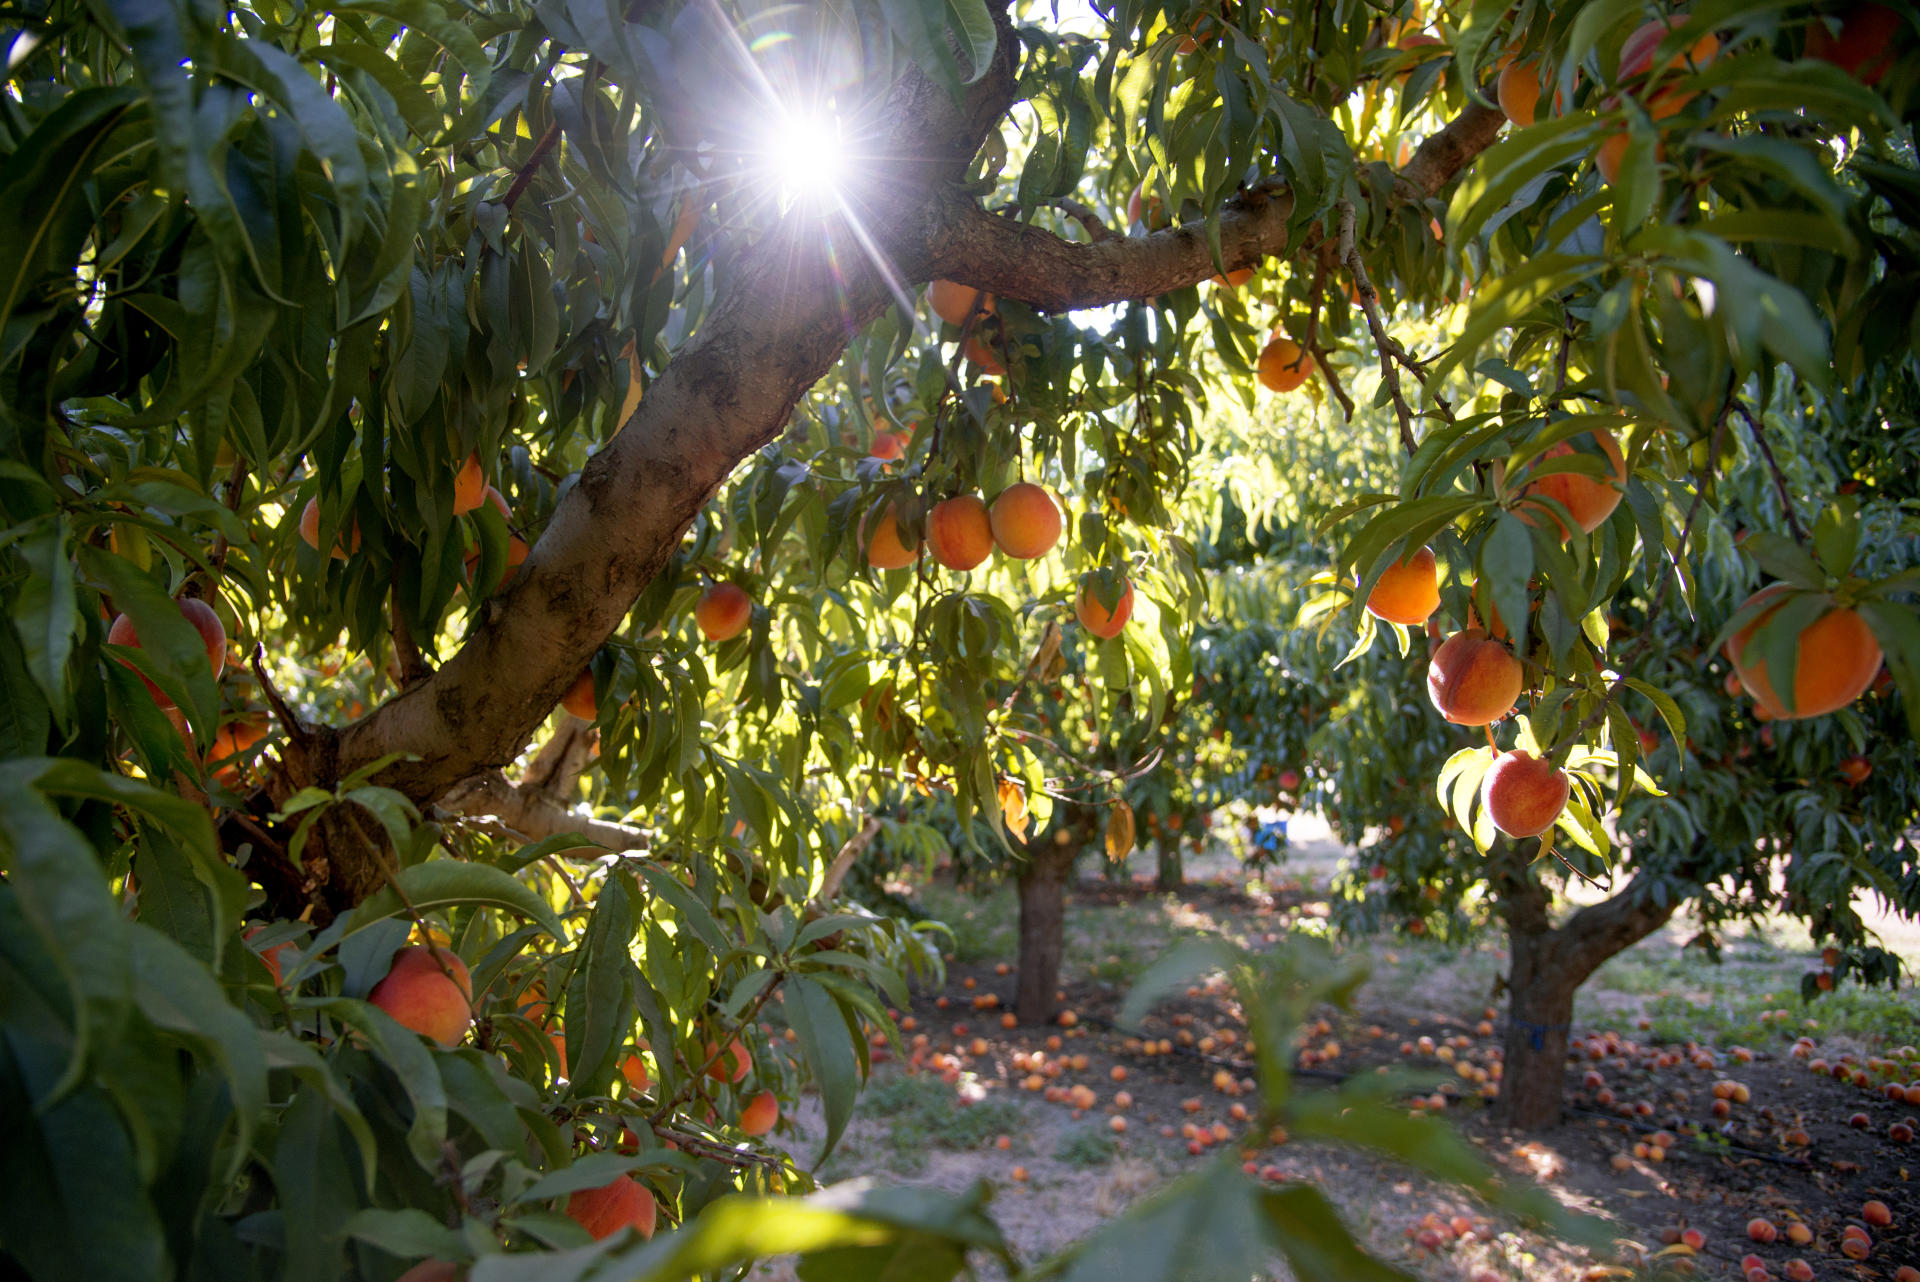 The sunshine peeks through branches and leaves of peach trees at the University Farm.